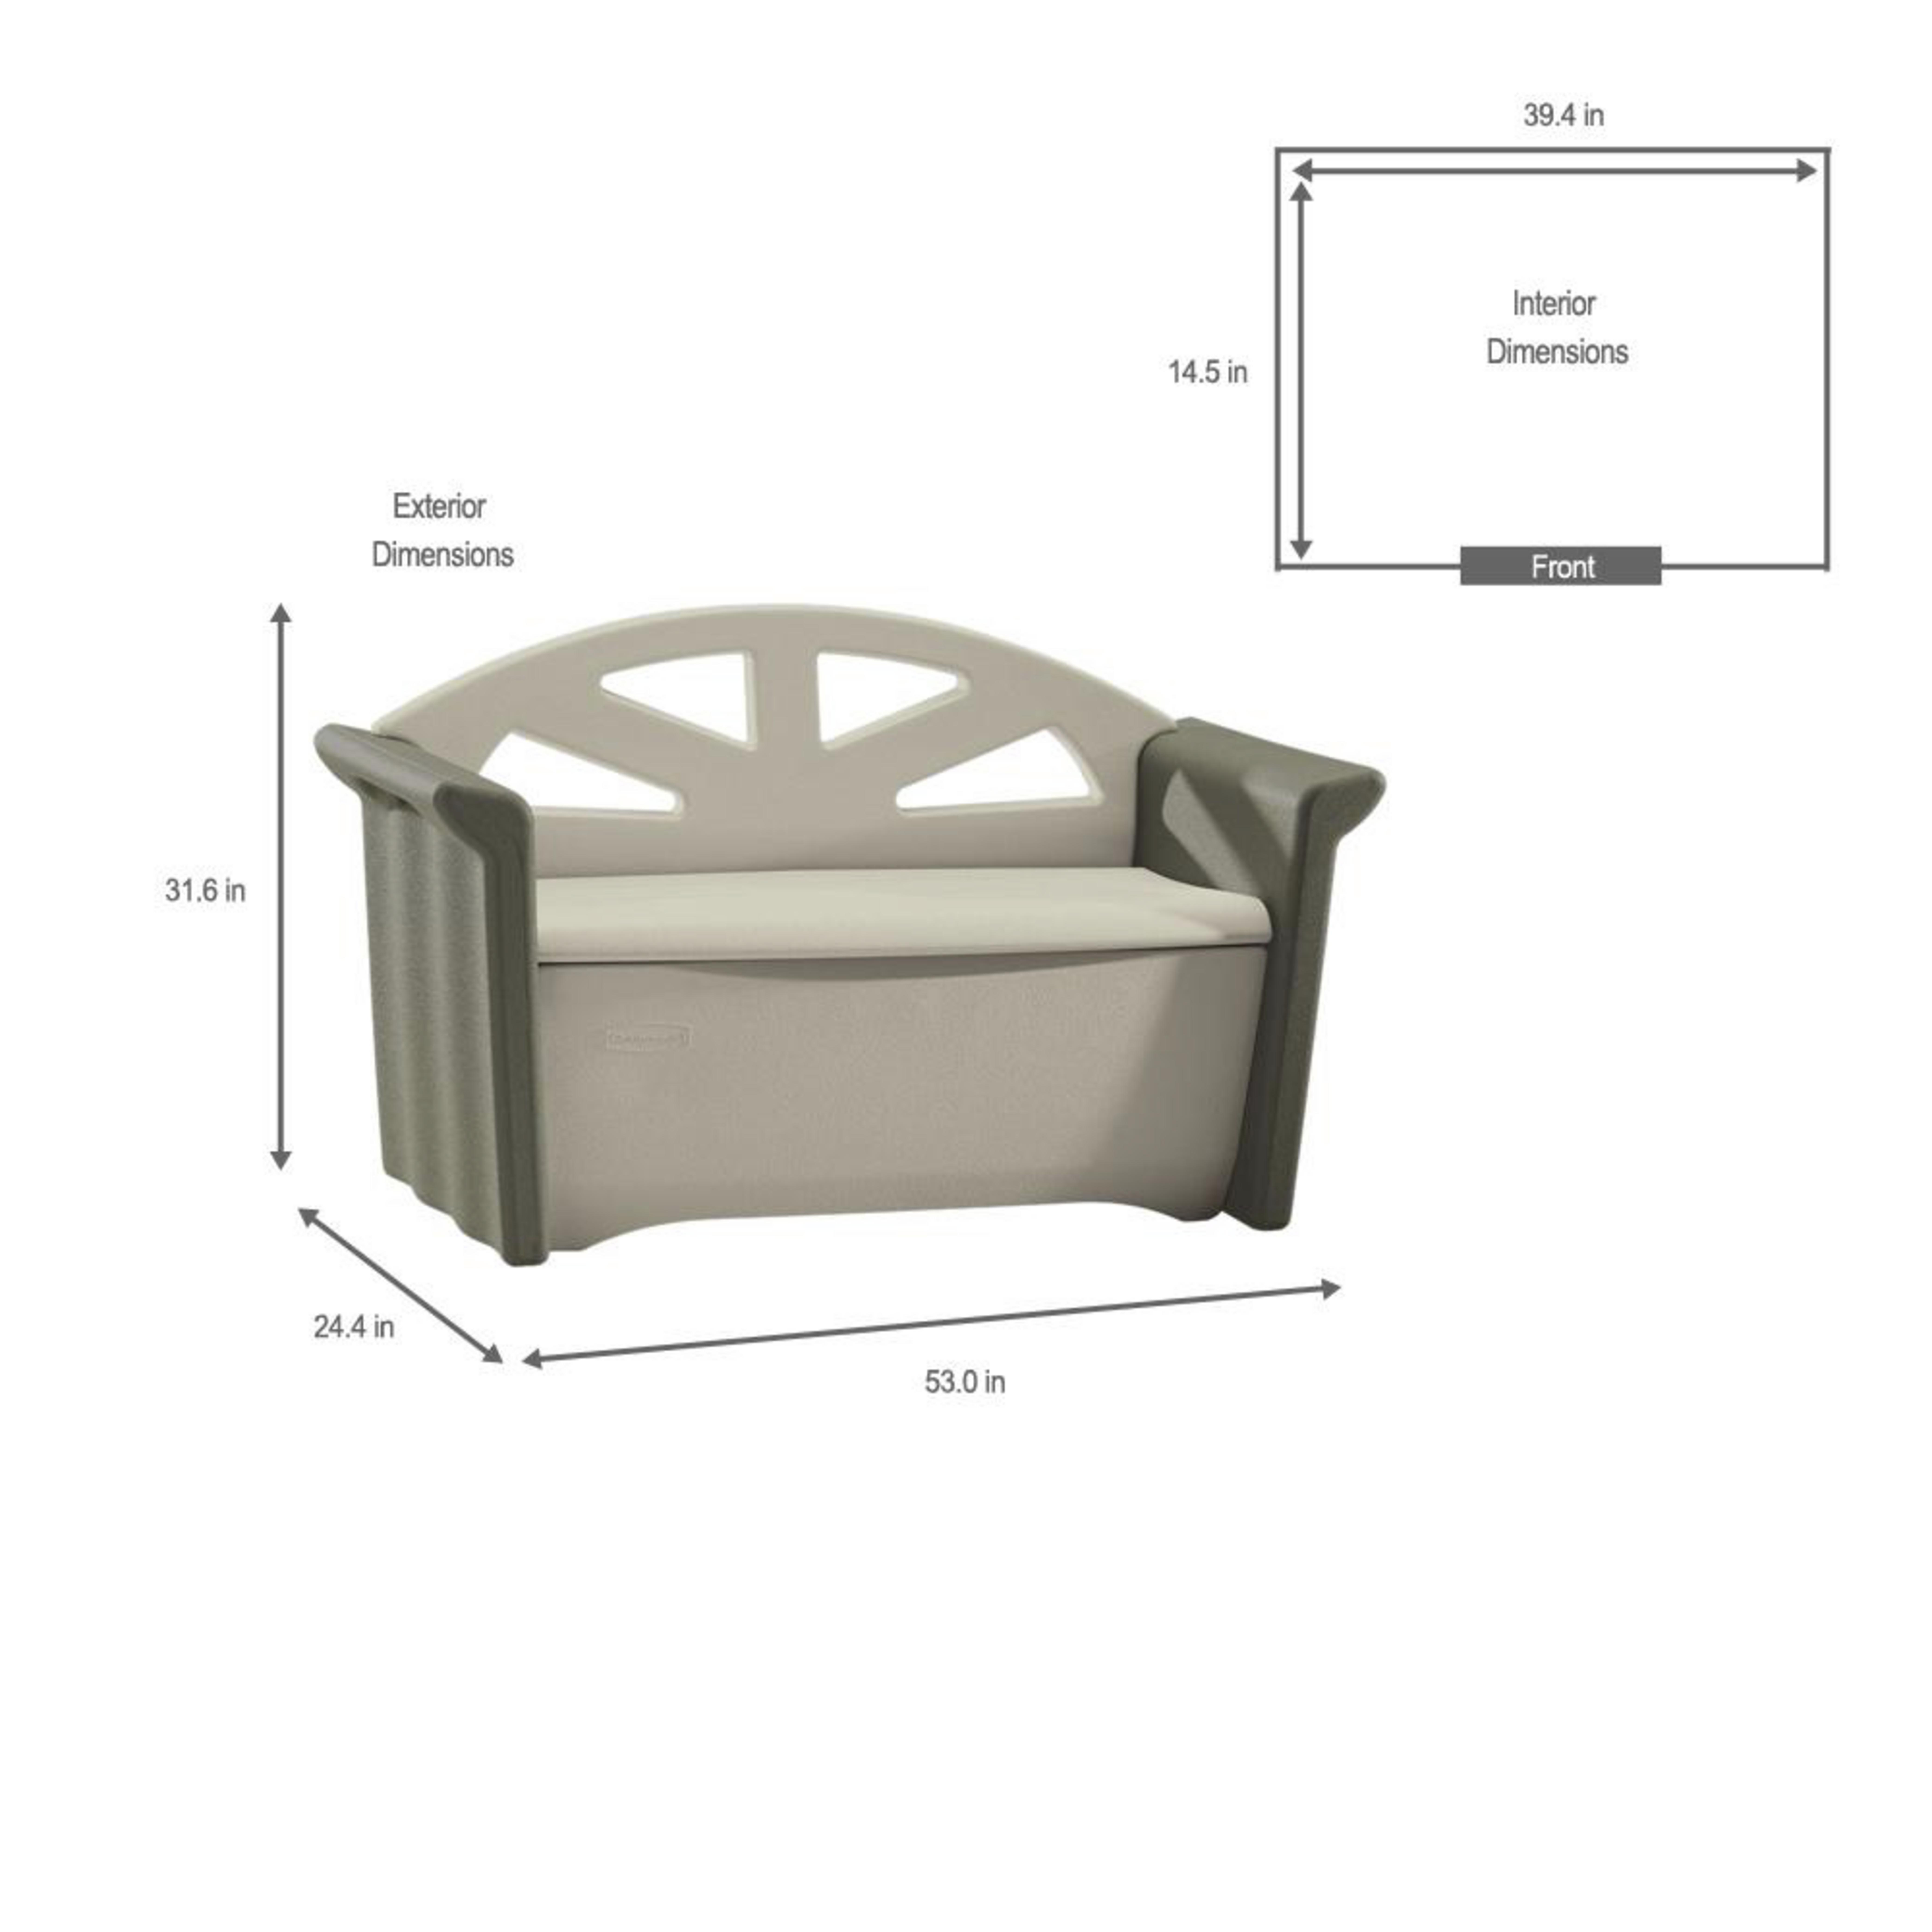 Rubbermaid Outdoor Patio Storage Bench, Resin, Olive & Sandstone - image 3 of 5